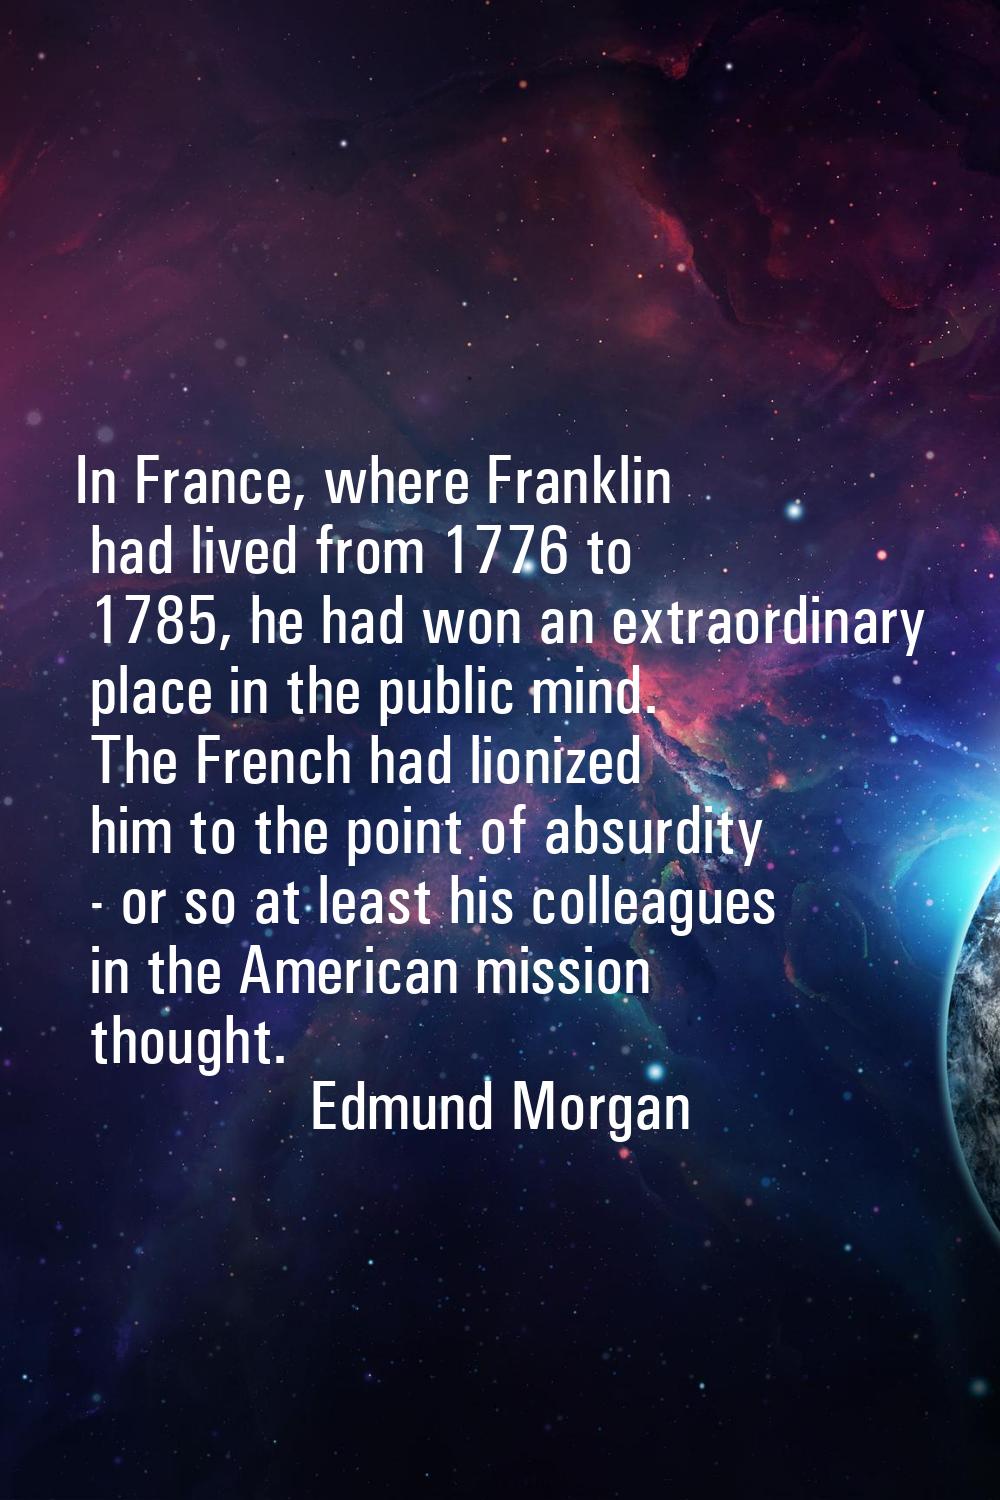 In France, where Franklin had lived from 1776 to 1785, he had won an extraordinary place in the pub